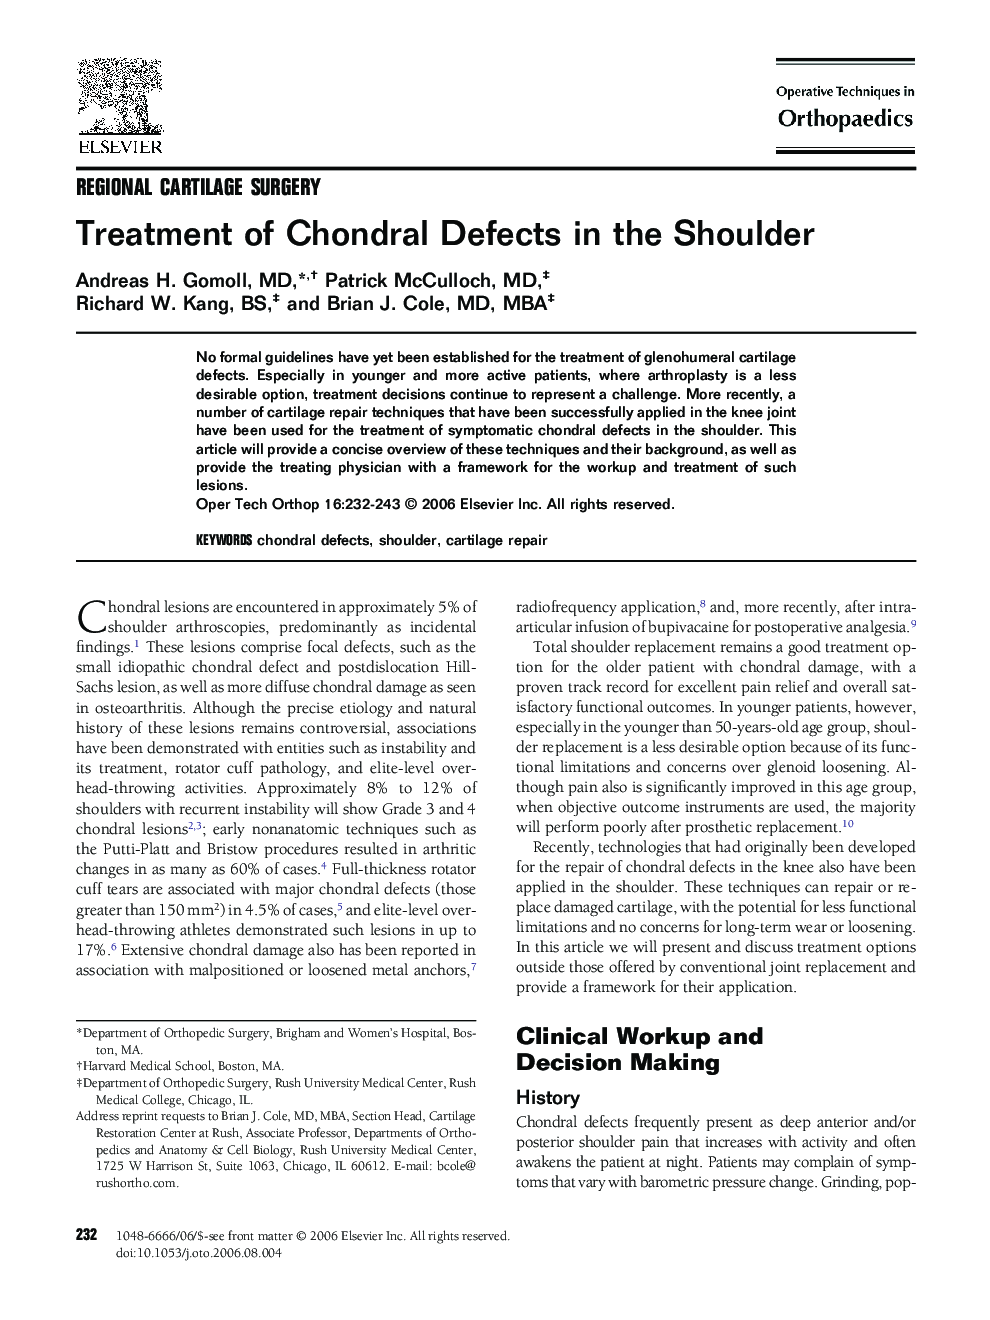 Treatment of Chondral Defects in the Shoulder